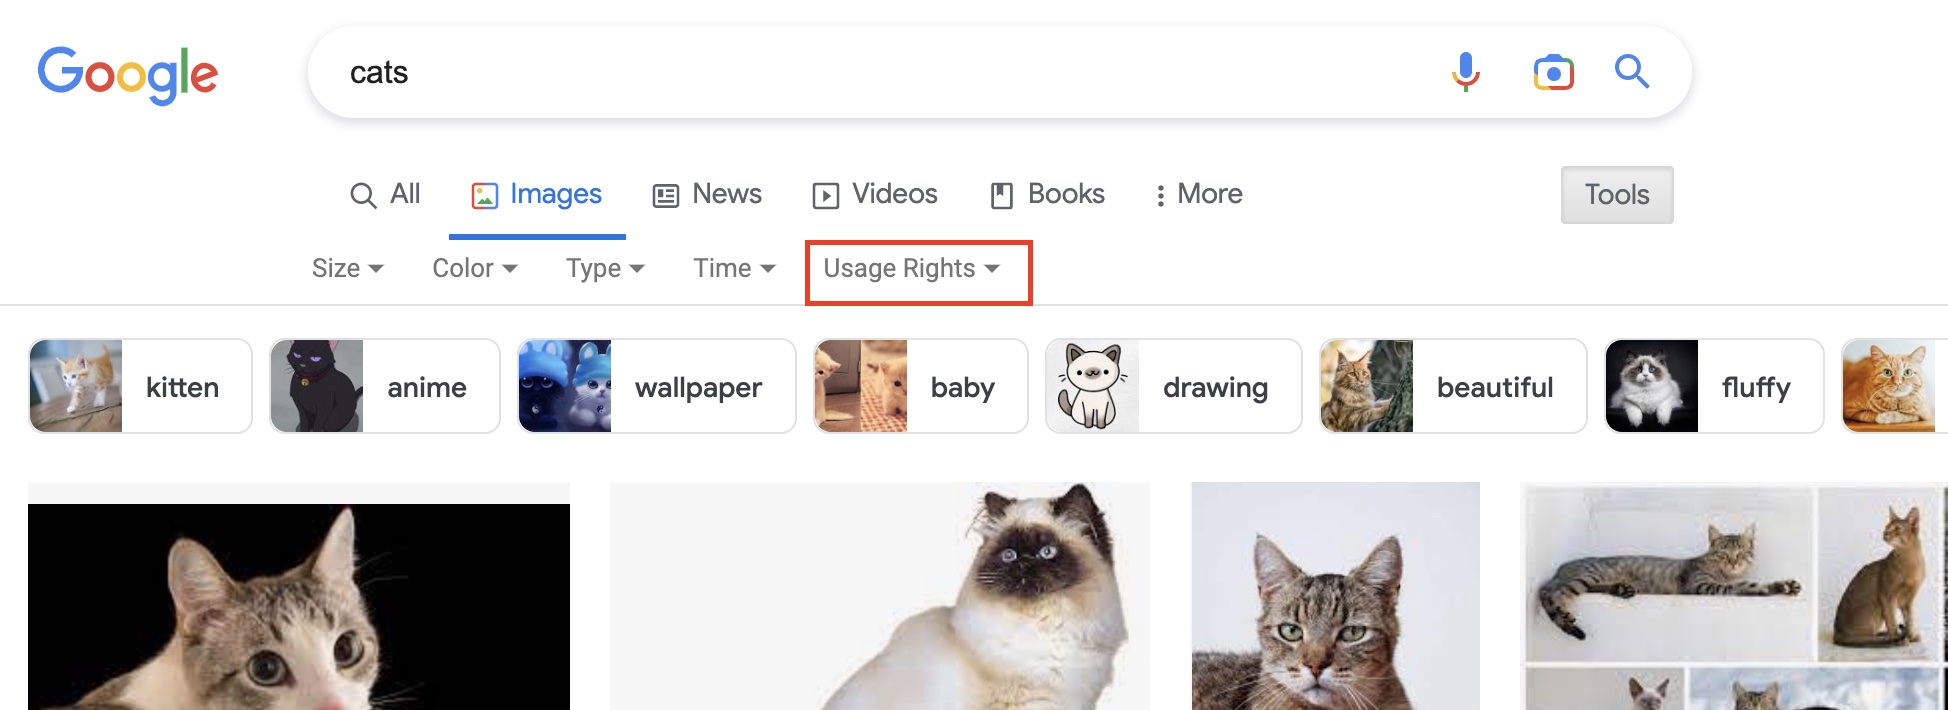 This is how you can search for images that you can use for free. LEGALLY